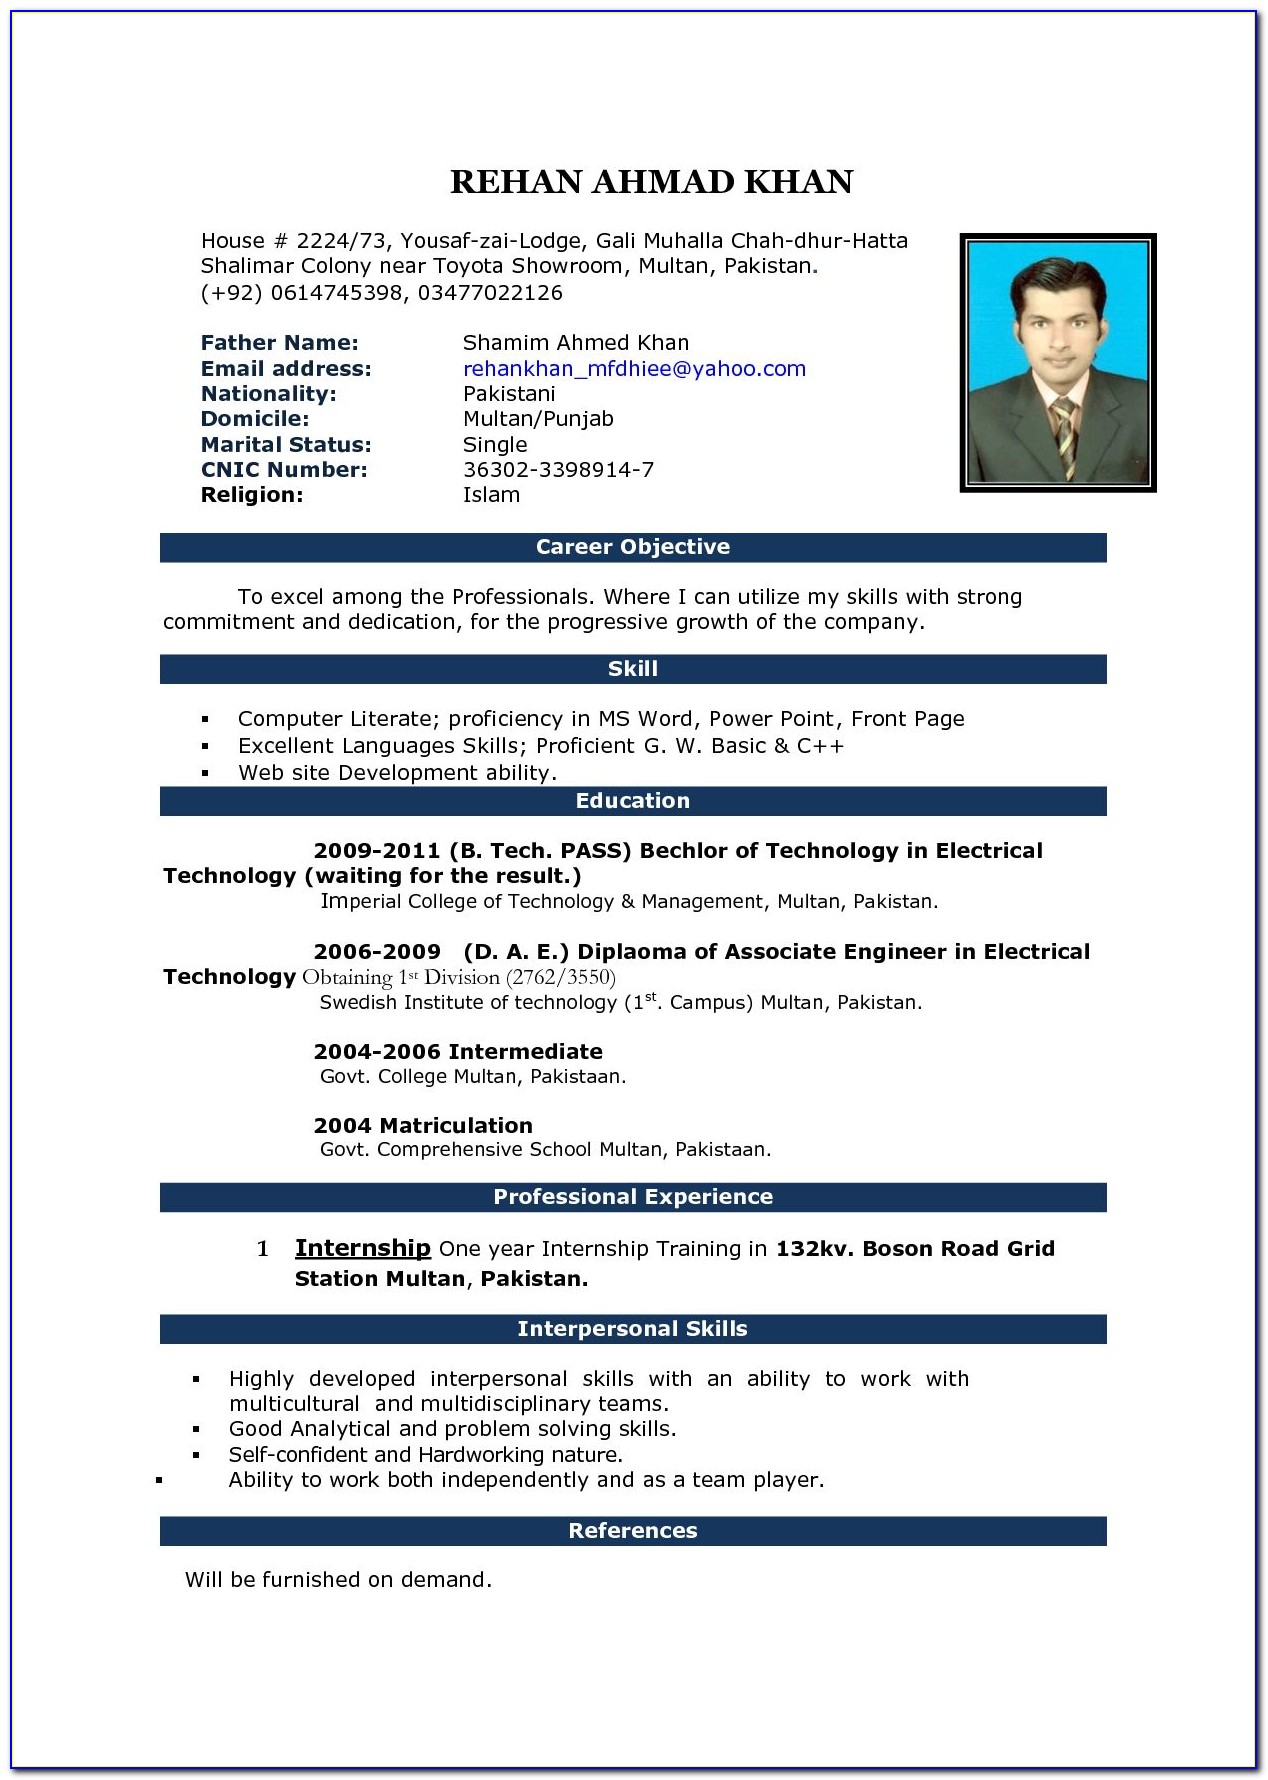 Resume Format Download In Ms Word For Fresher Civil Engineer